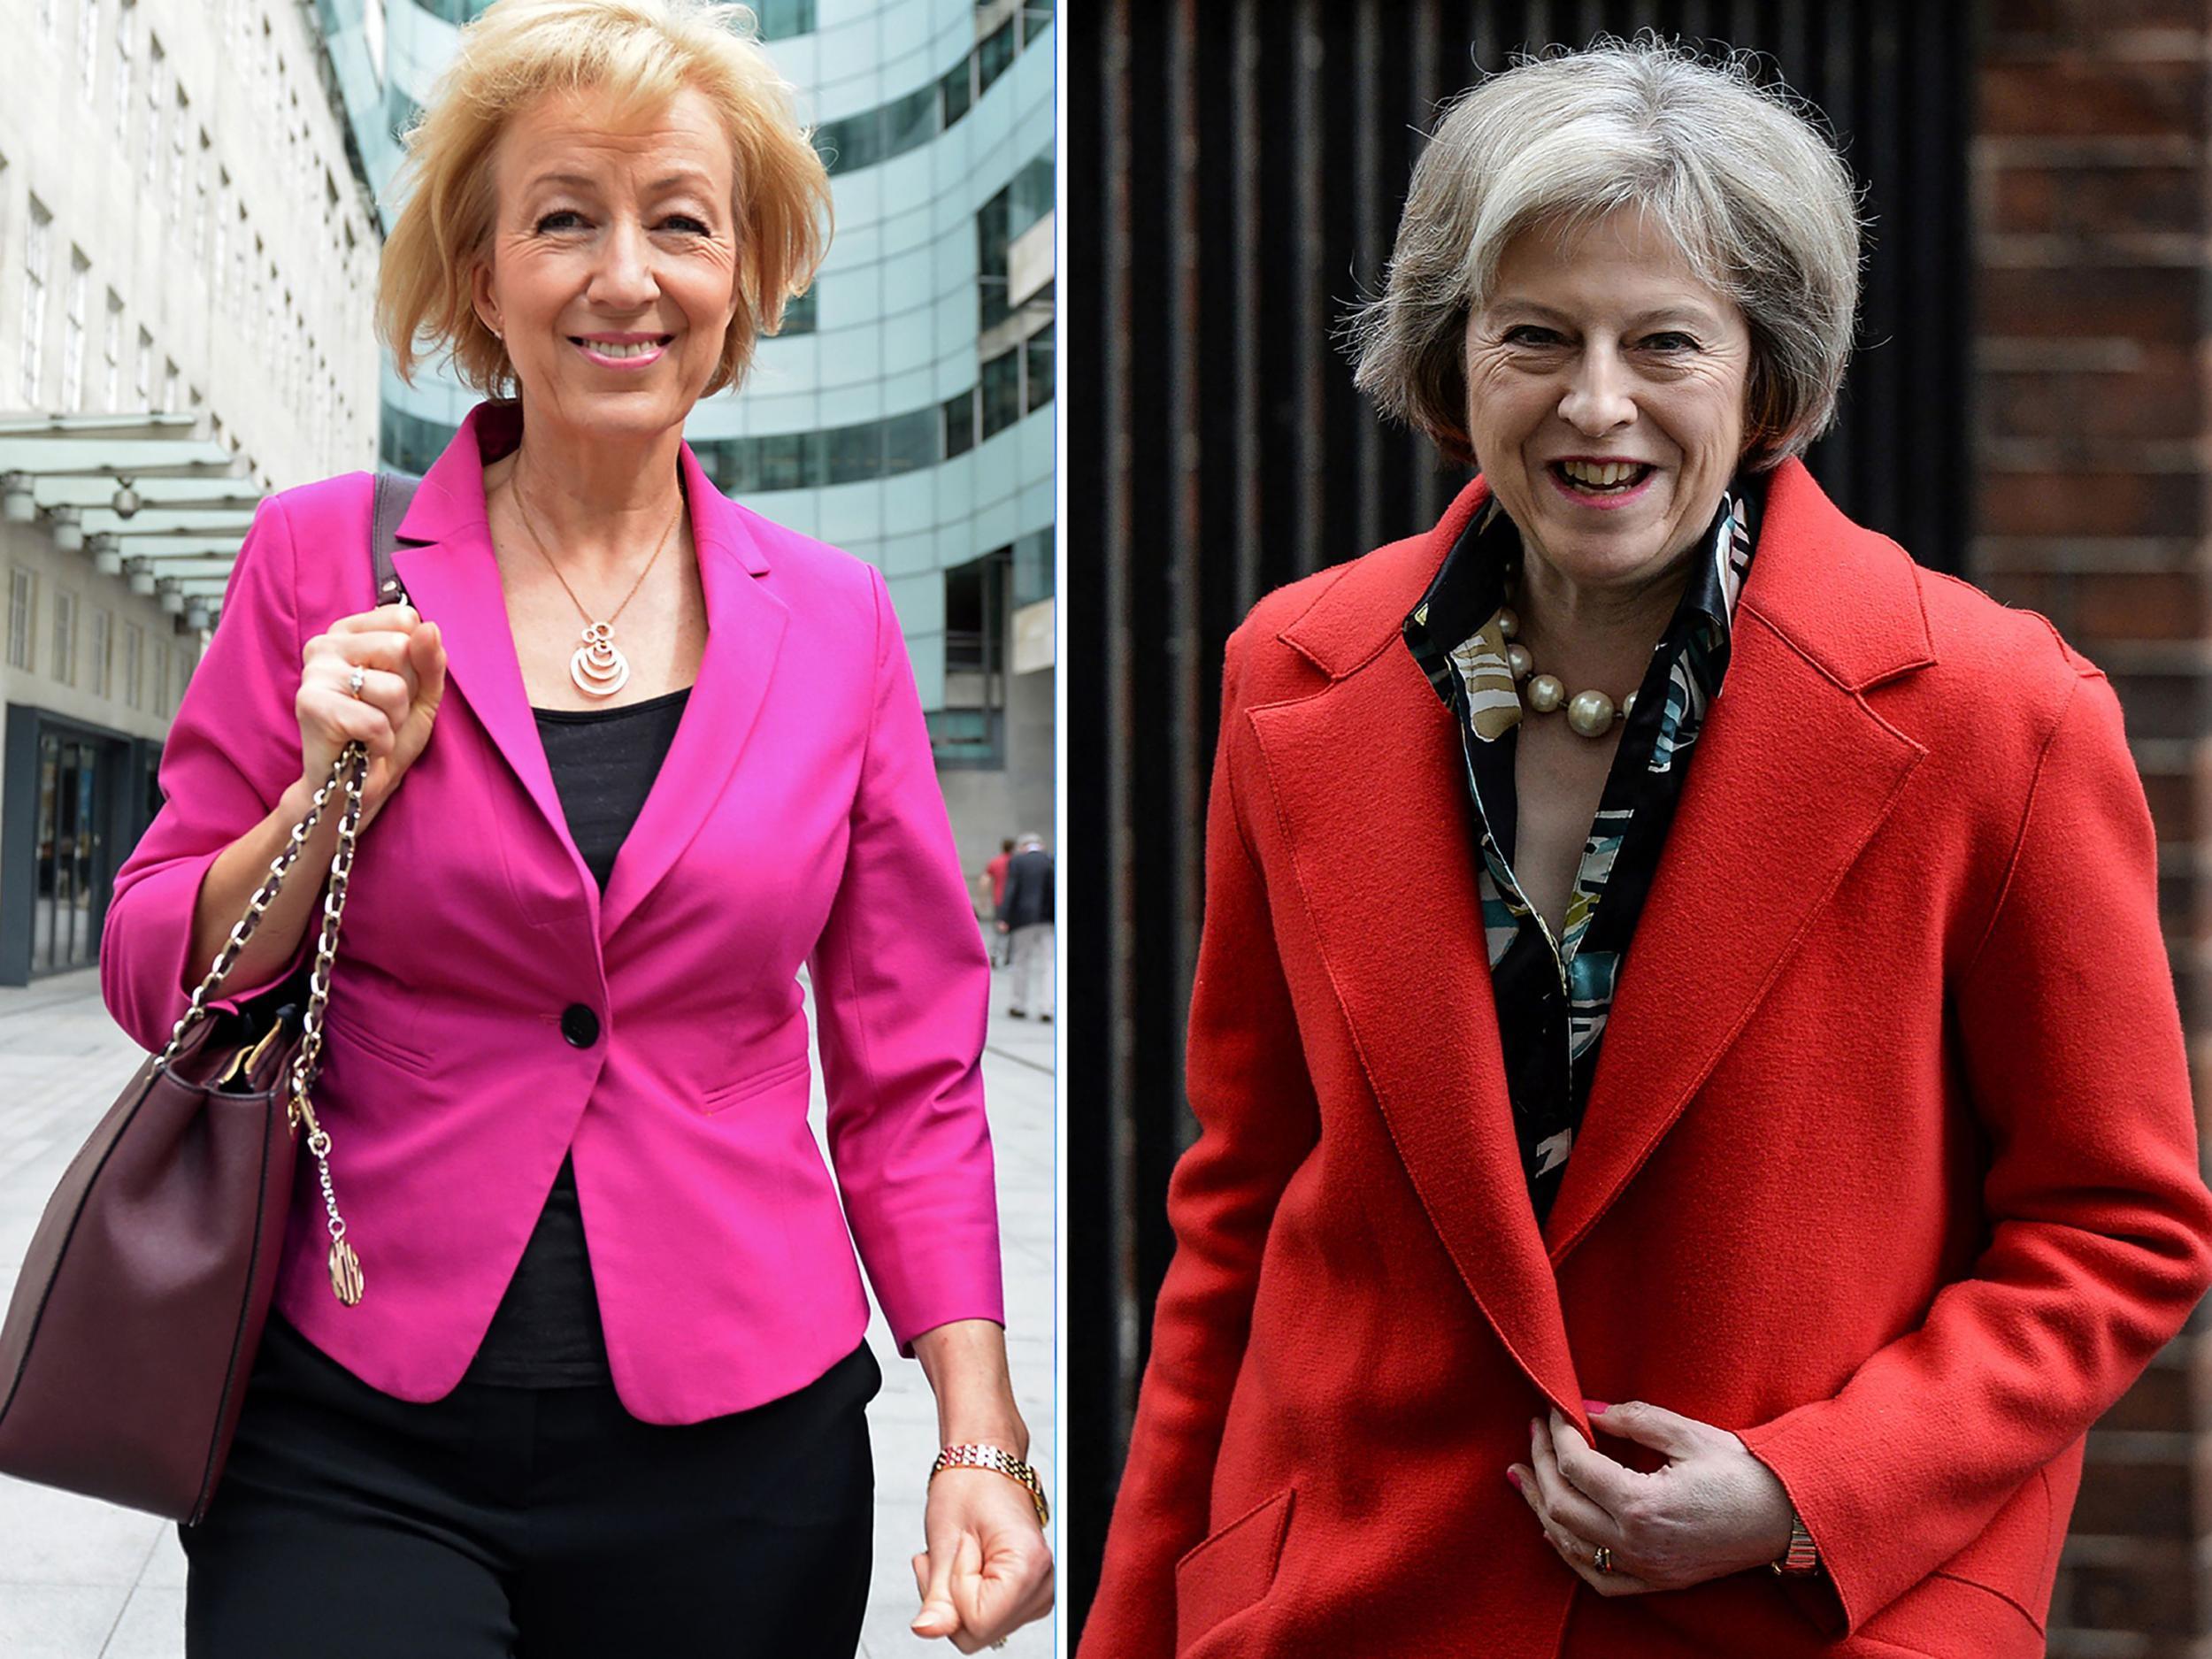 Andrea Leadsom and Theresa May hope to convince Tory members that they can lead the country